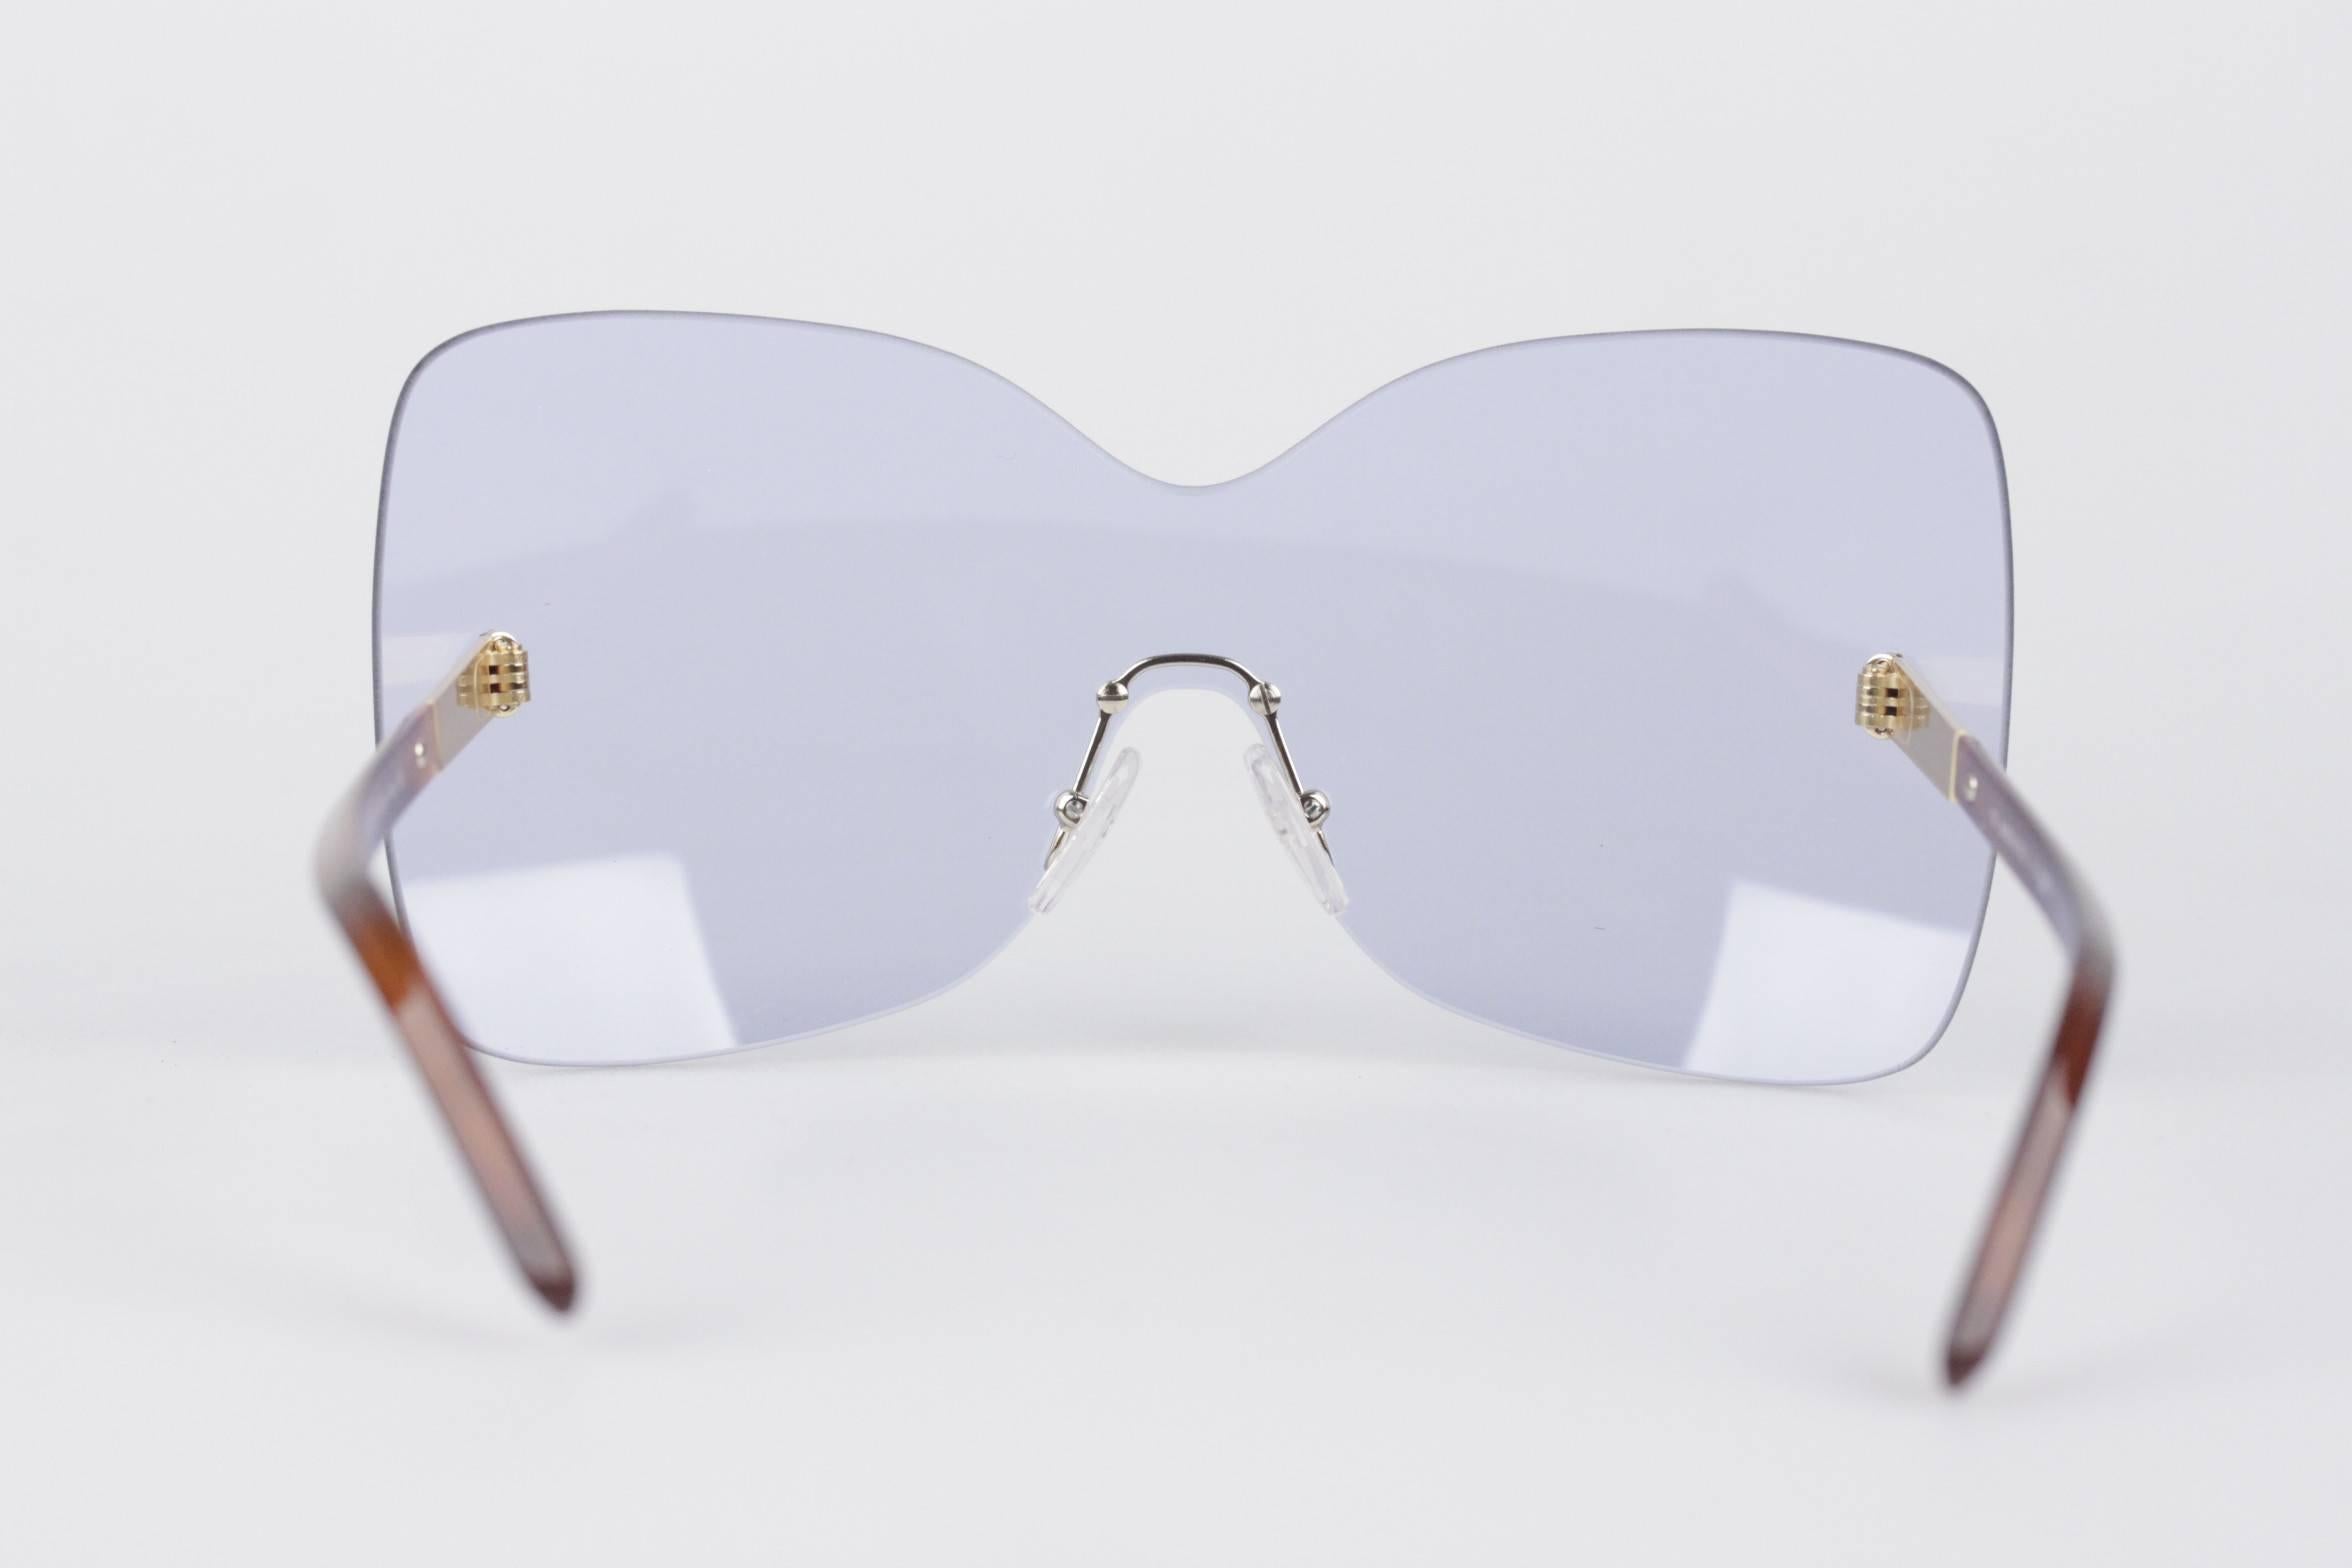  - Futuristic oversized one-piece Sunglasses, from the 2012 Spring/Summer Collection by FENDI
- Model: FS5273
- Color: 424 - Havana/Light Azure
- Rimless design & Butterfly style
- Polycarbonathe one-piece lens
- 100% UV Protection
- FENDI